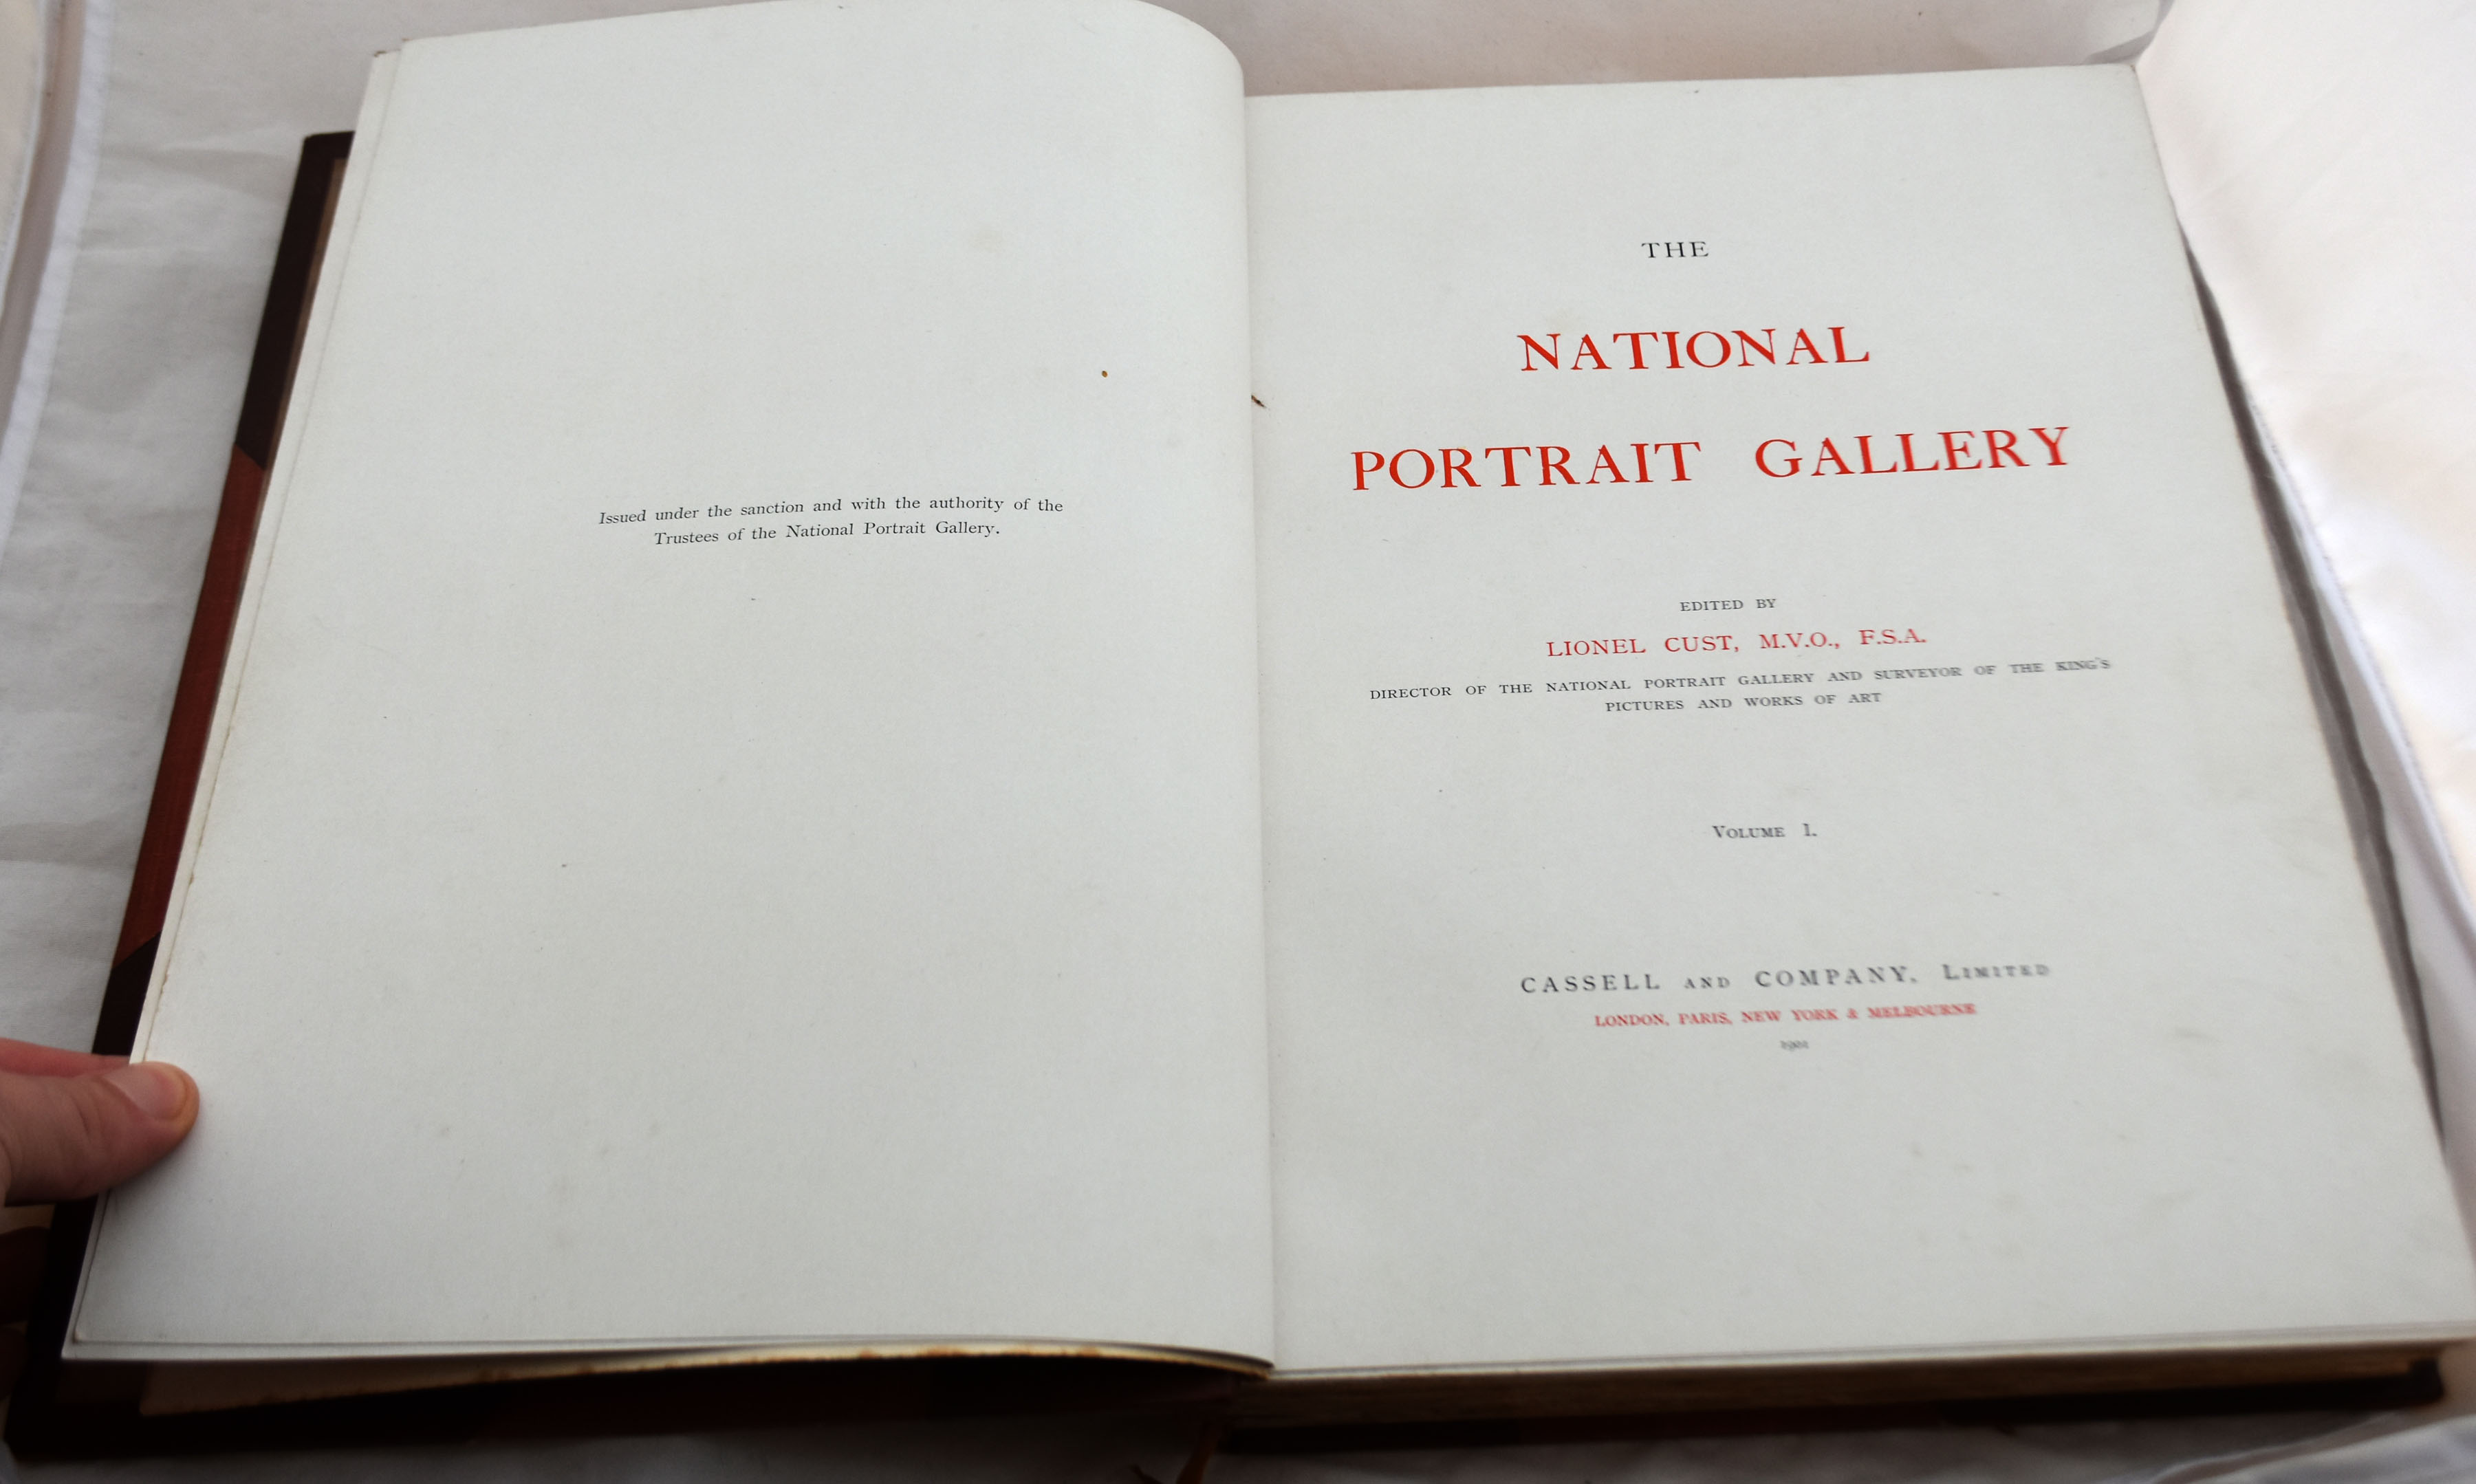 Lionel Cust. The National Portrait Gallery Volumes I & II 1901 Limited Edition of 750 [Book] - Image 5 of 12